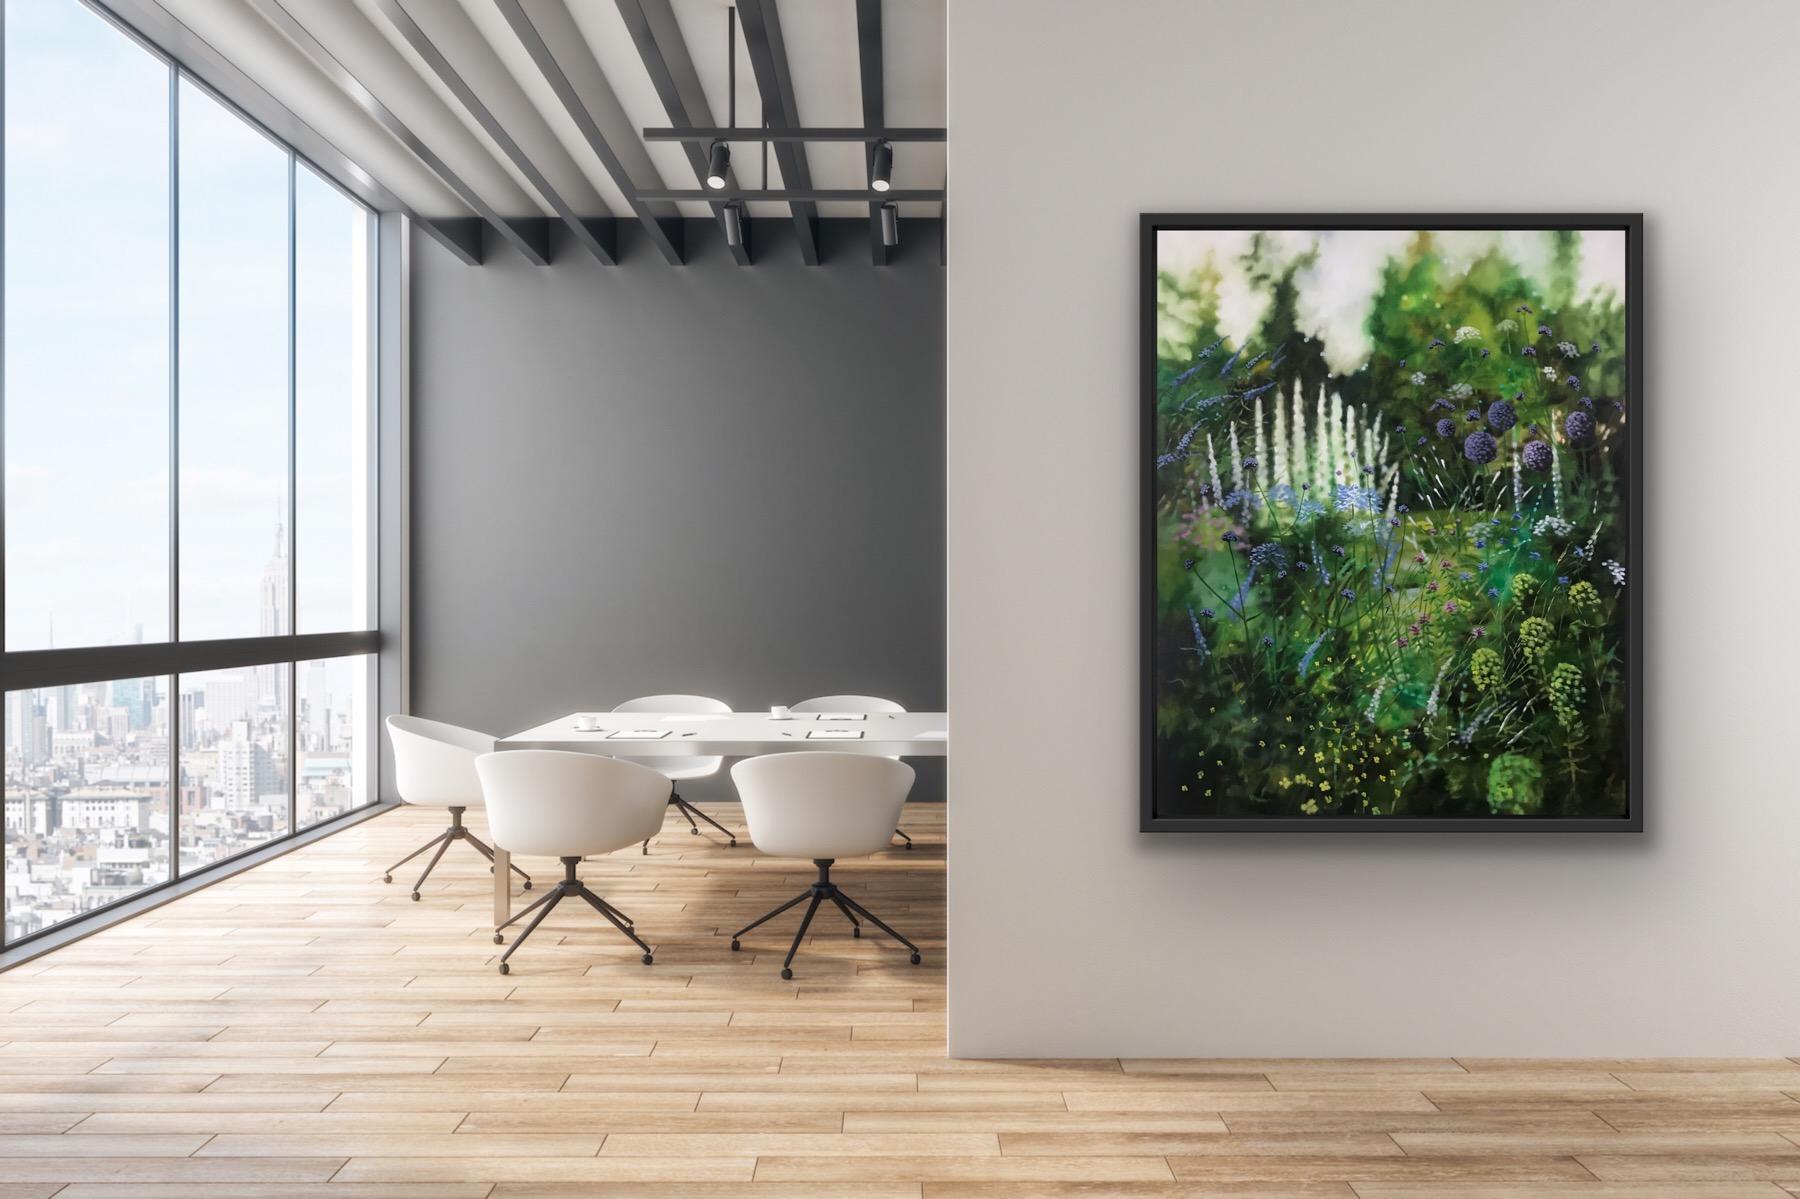 Dorset Summer Garden by Dylan Lloyd is an original painting. The scene overlooks a beautiful budding garden in the summertime.

ADDITIONAL INFORMATION:
Oil Paint on Canvas
100 H x 80.5 W x 4 D cm (39.37 x 31.69 x 1.57 in)
Sold unframed

Image size: